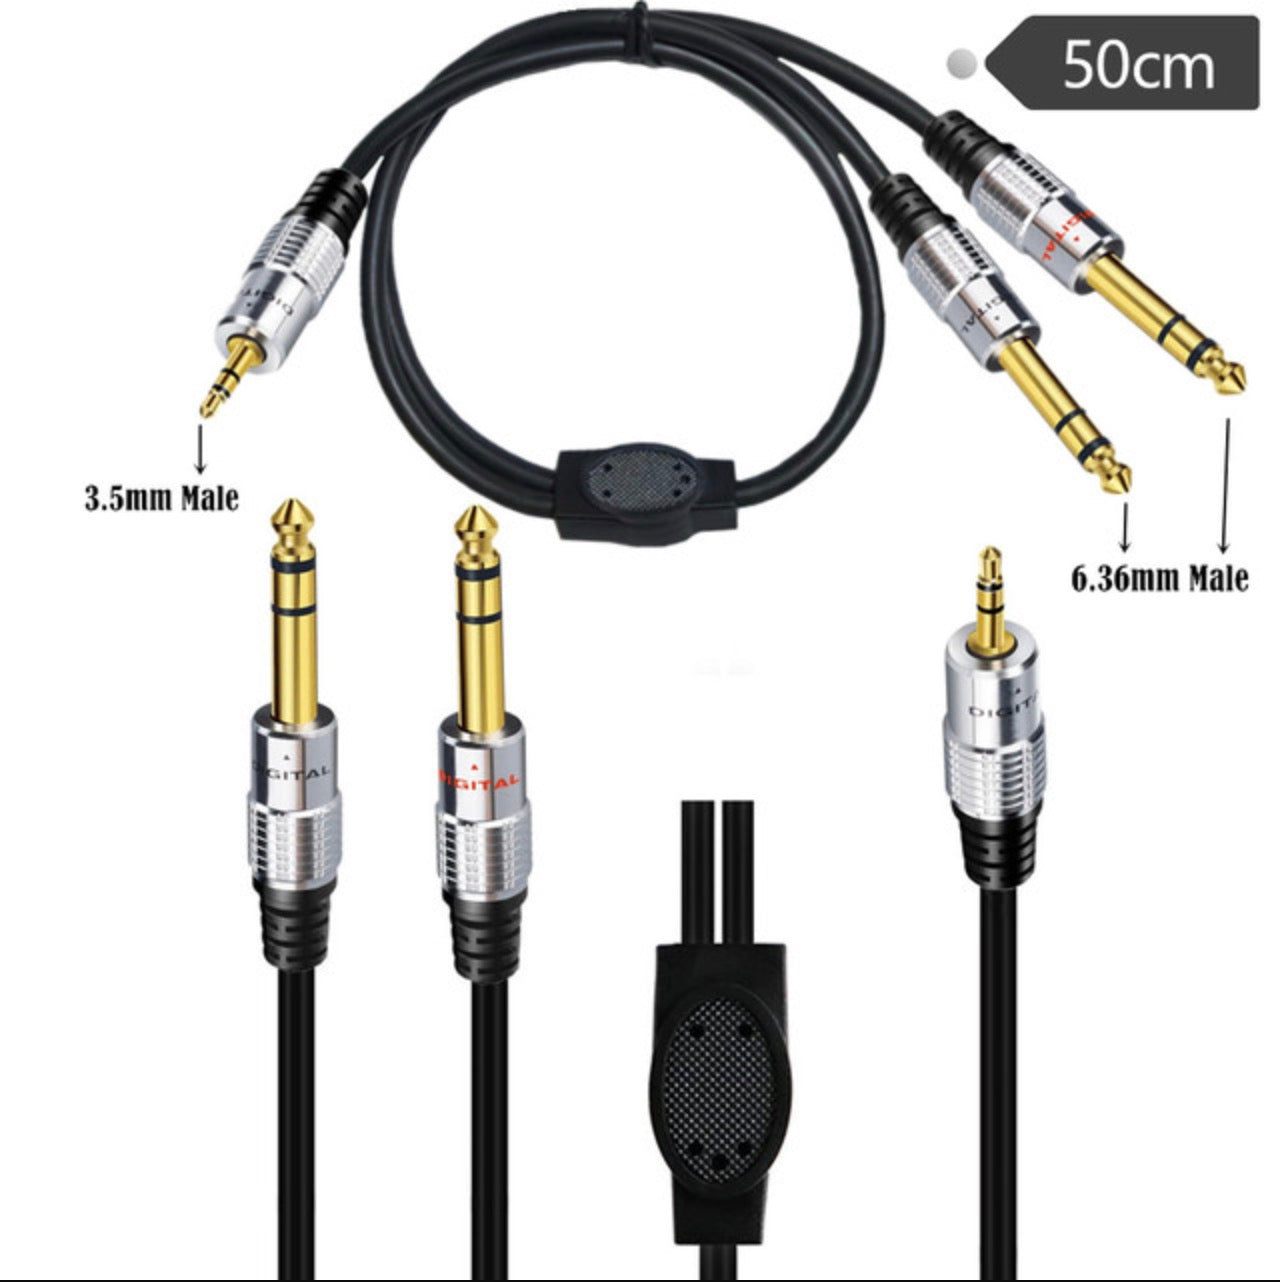 3.5mm 1/4" inch Male to Dual 6.35mm Male Stereo Headphone Guitar Extension Cable 0.5m